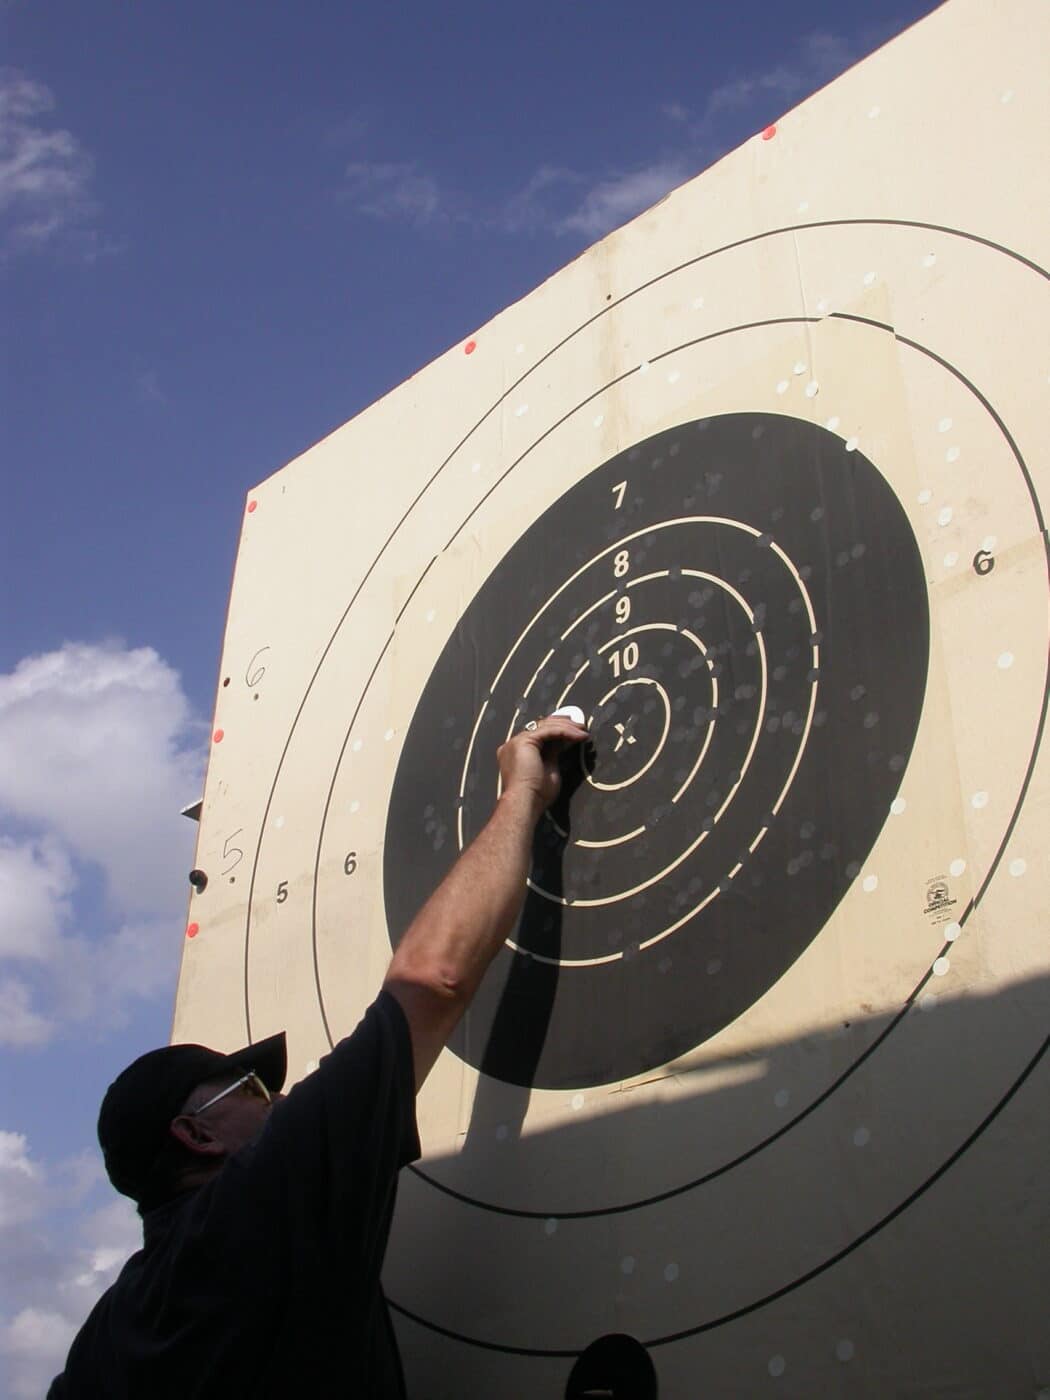 Man examining target during a long range competition target shooting event